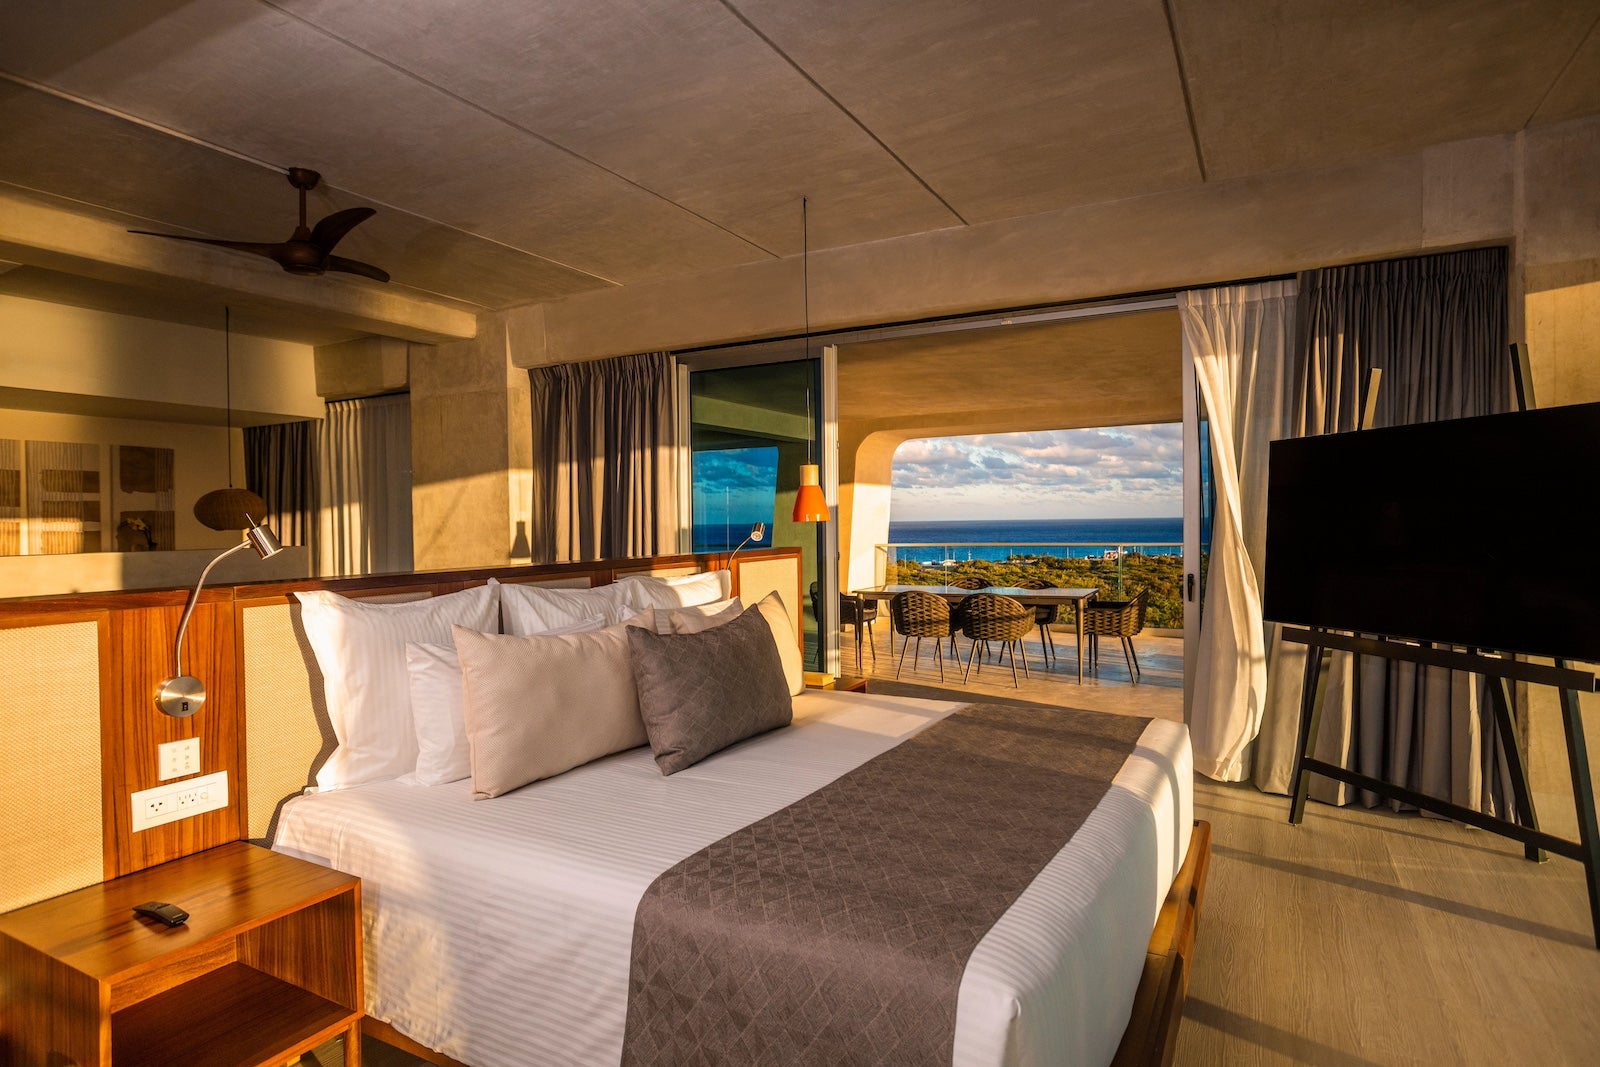 You are currently viewing 20 new Hyatt hotels where you can get 500 extra points per night